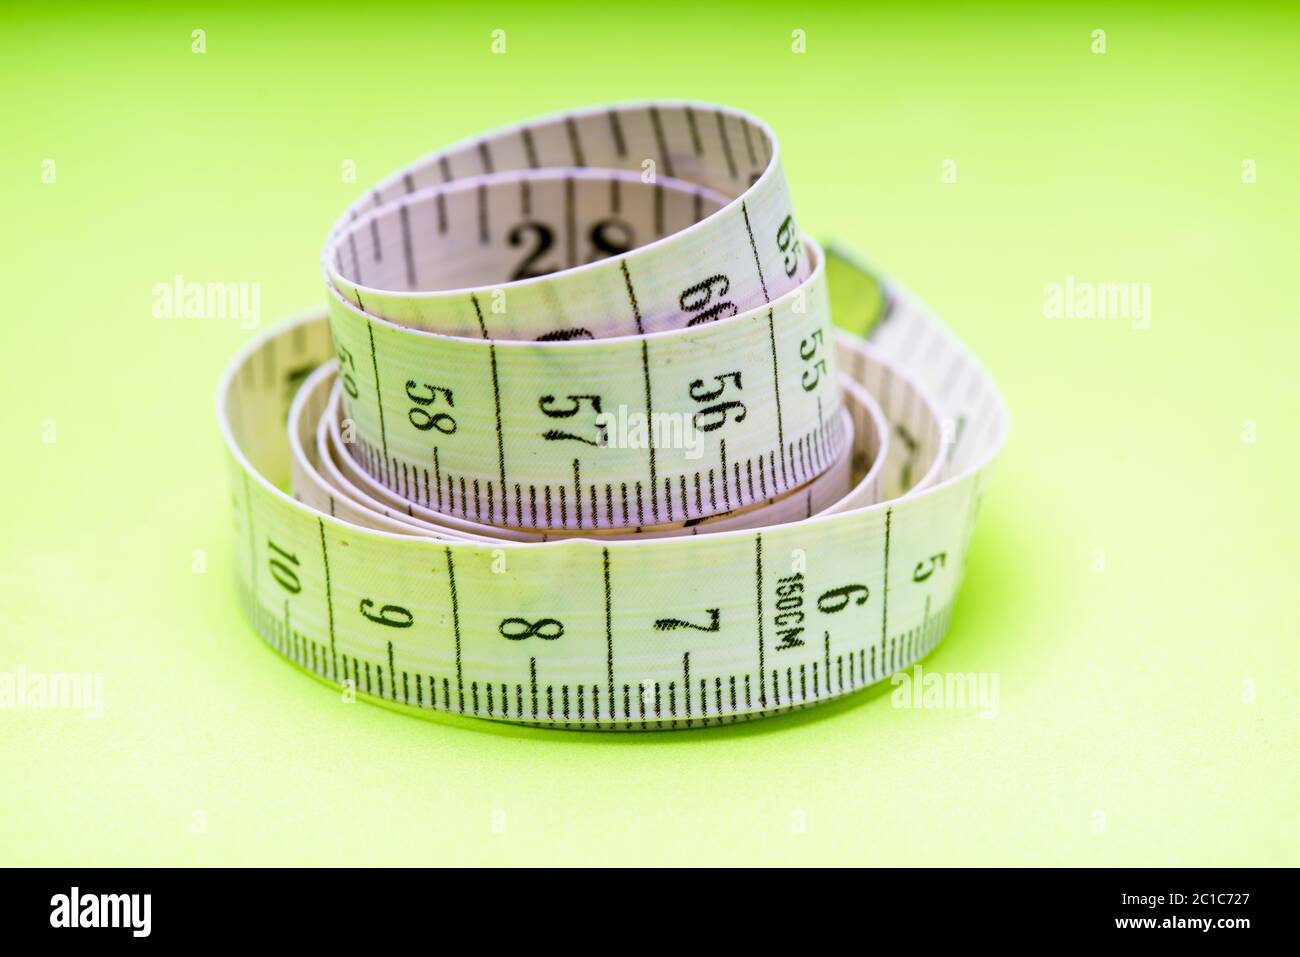 Female hands using wooden tailor ruler to measure cotton fabric. Textile  sale and sewing concept Stock Photo - Alamy